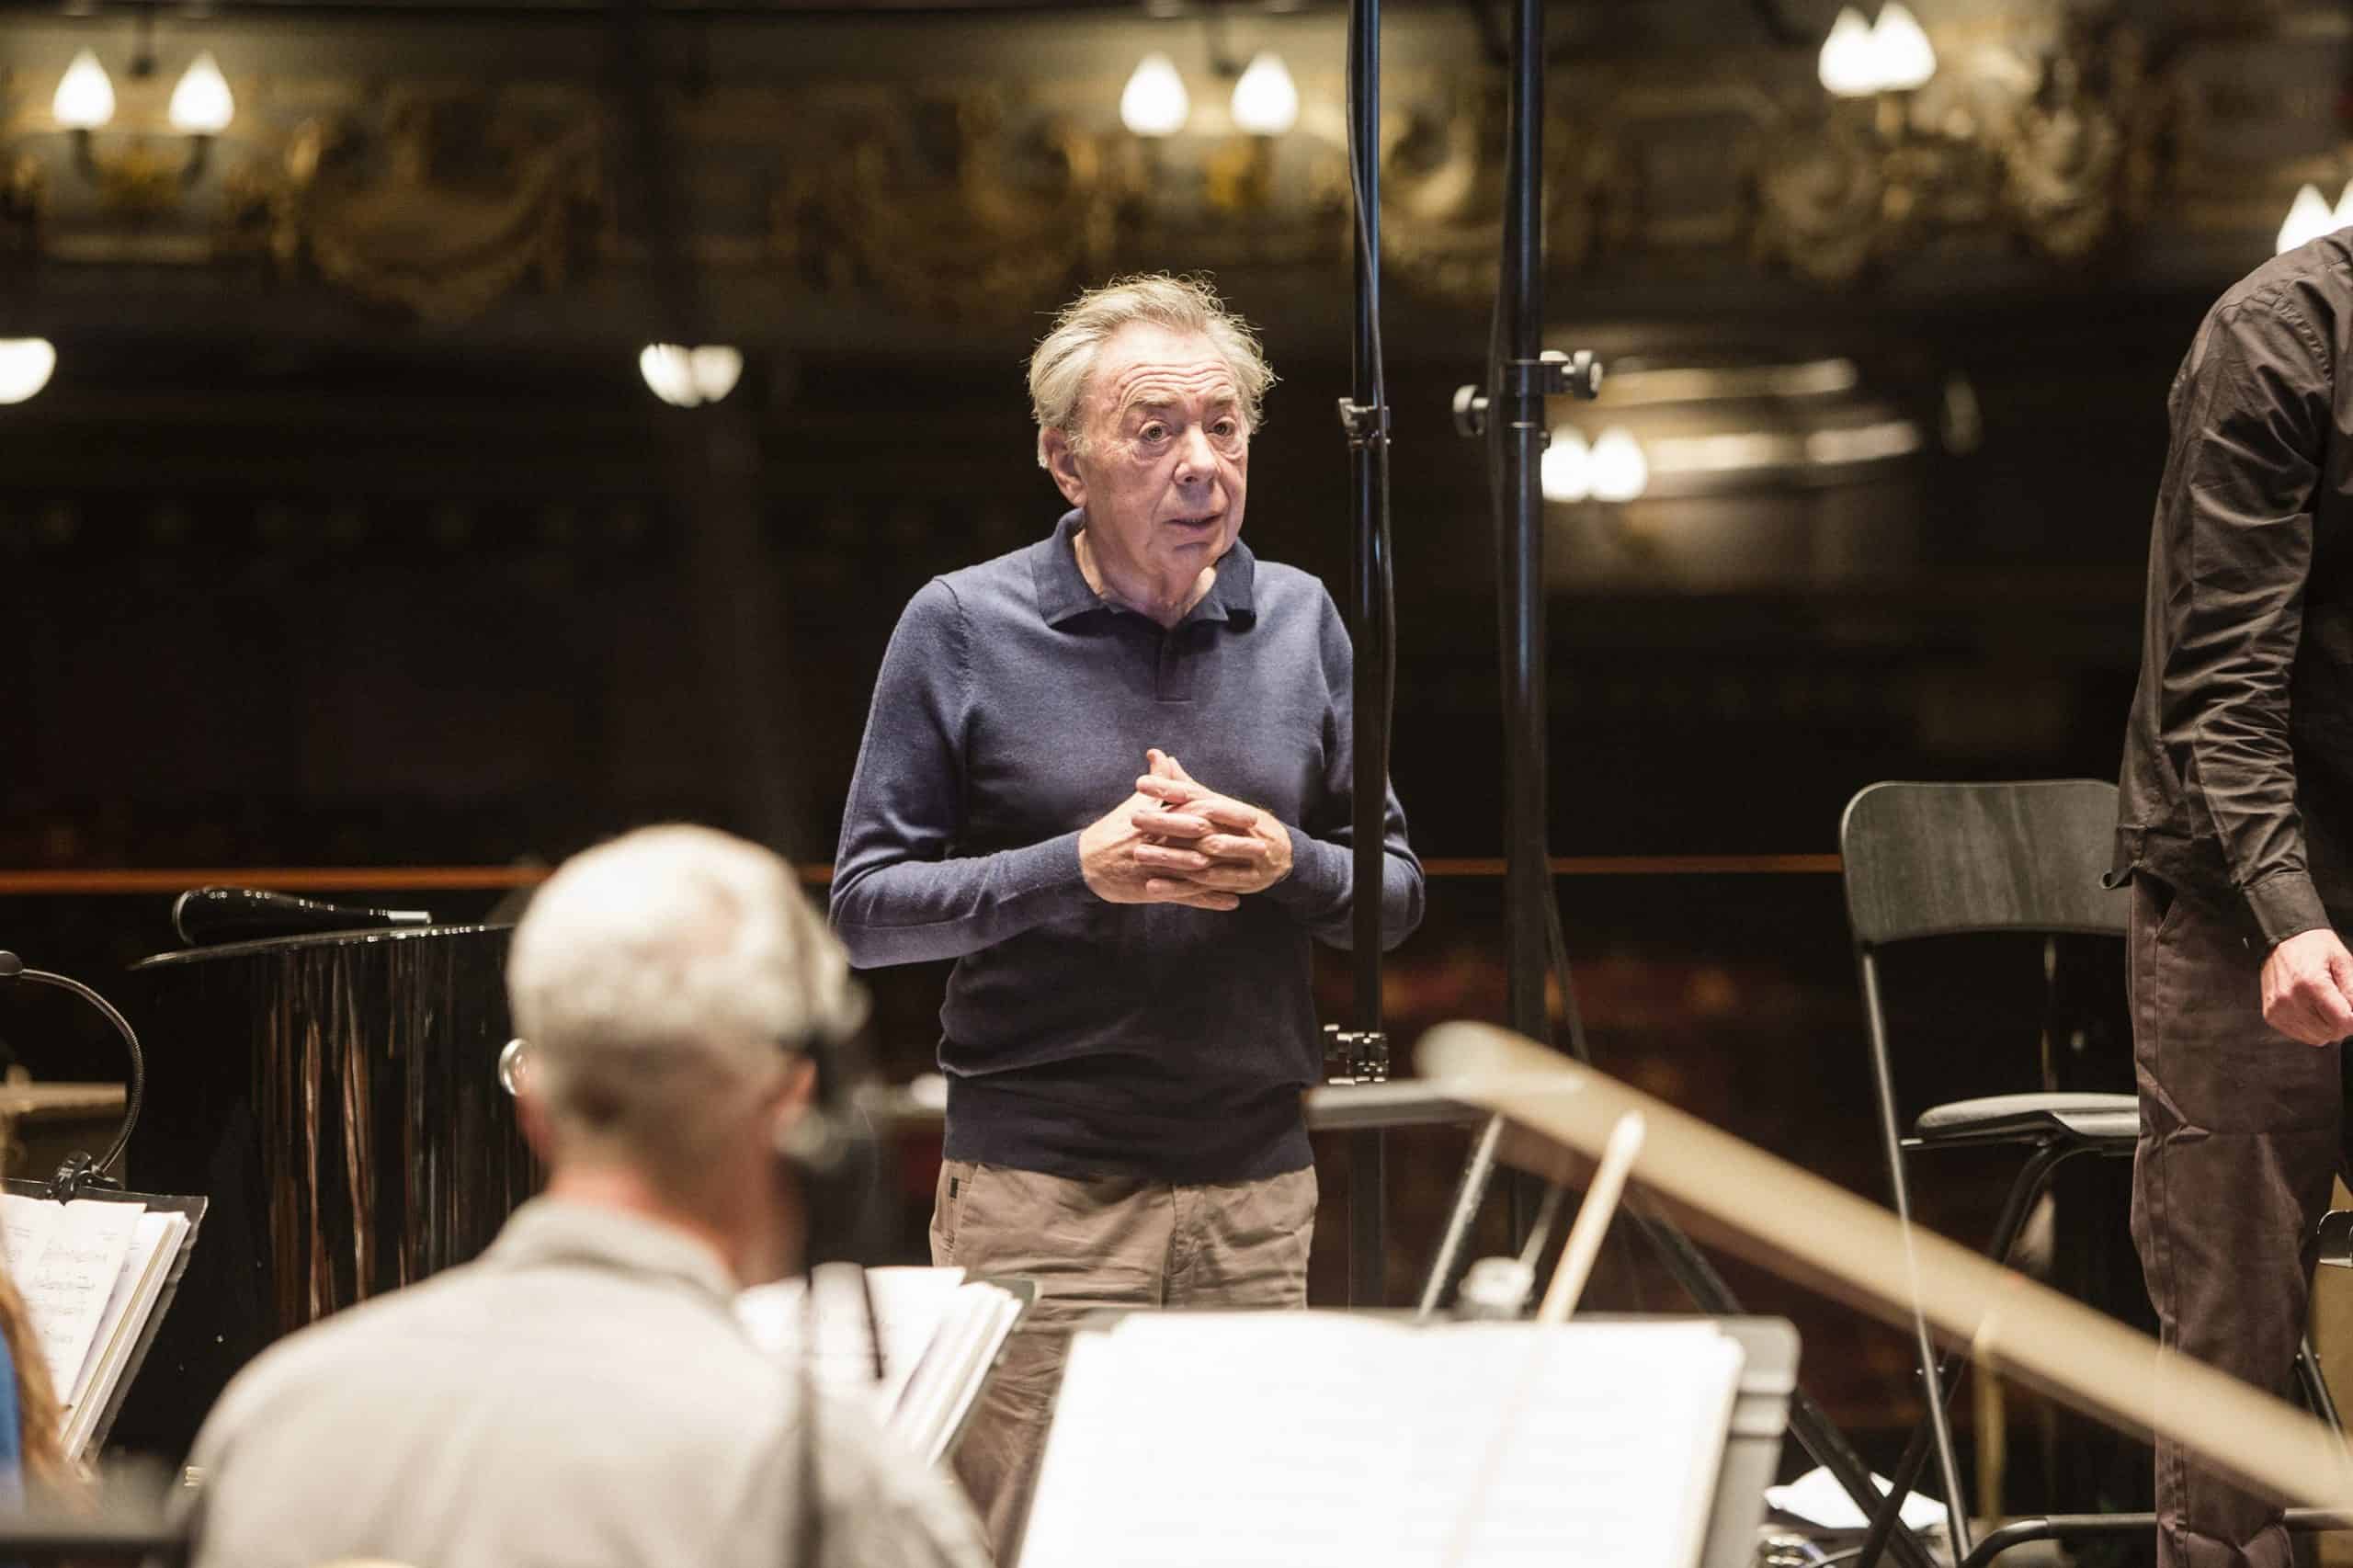 Lloyd Webber: Boris will have to arrest me if he wants to stop my theatres opening on June 21st